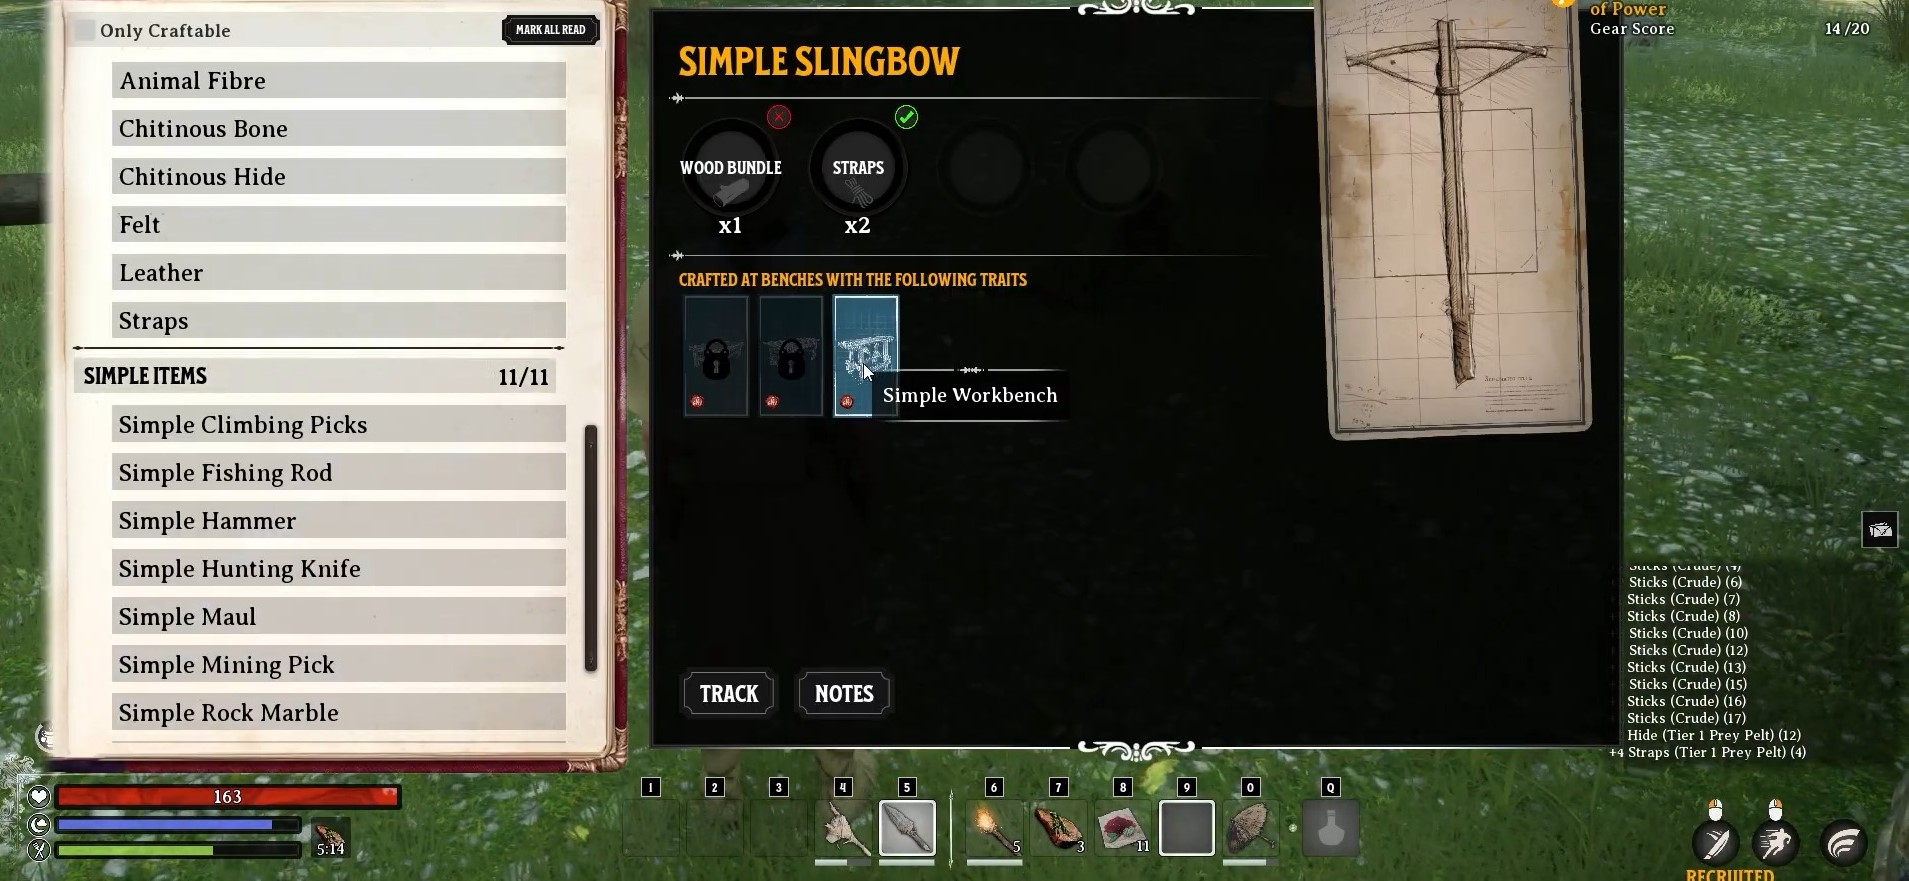 How to Get Nightingale Arrows (Slingbow Ammo)